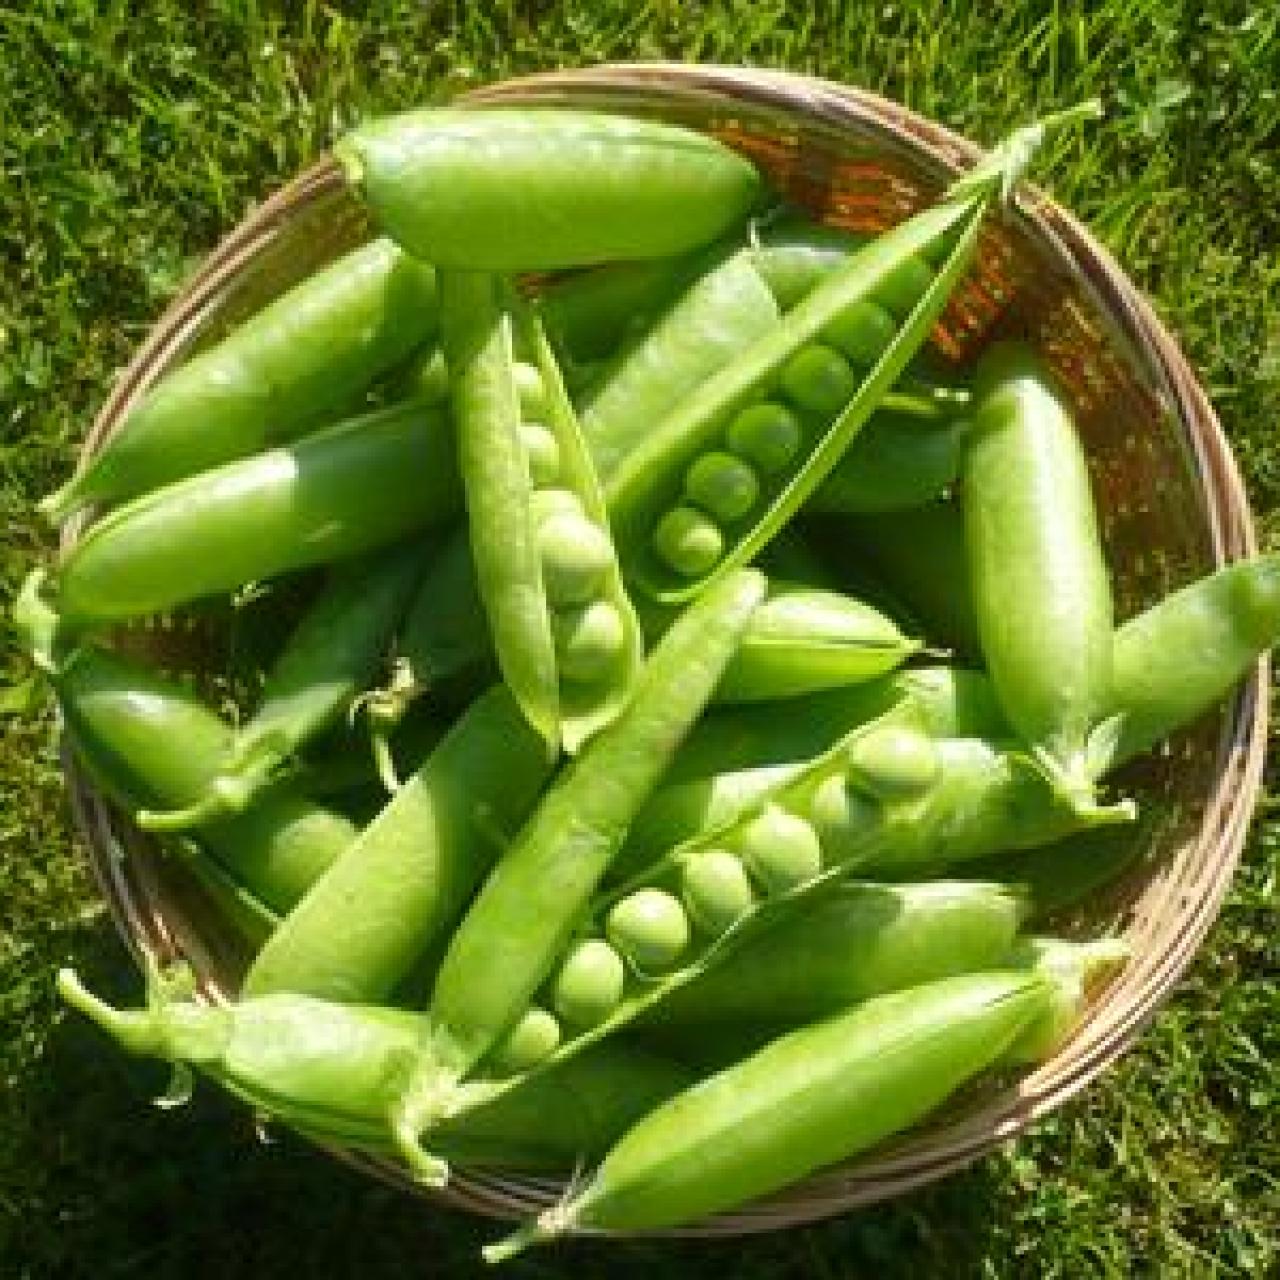 What's a legume and why should I eat it?